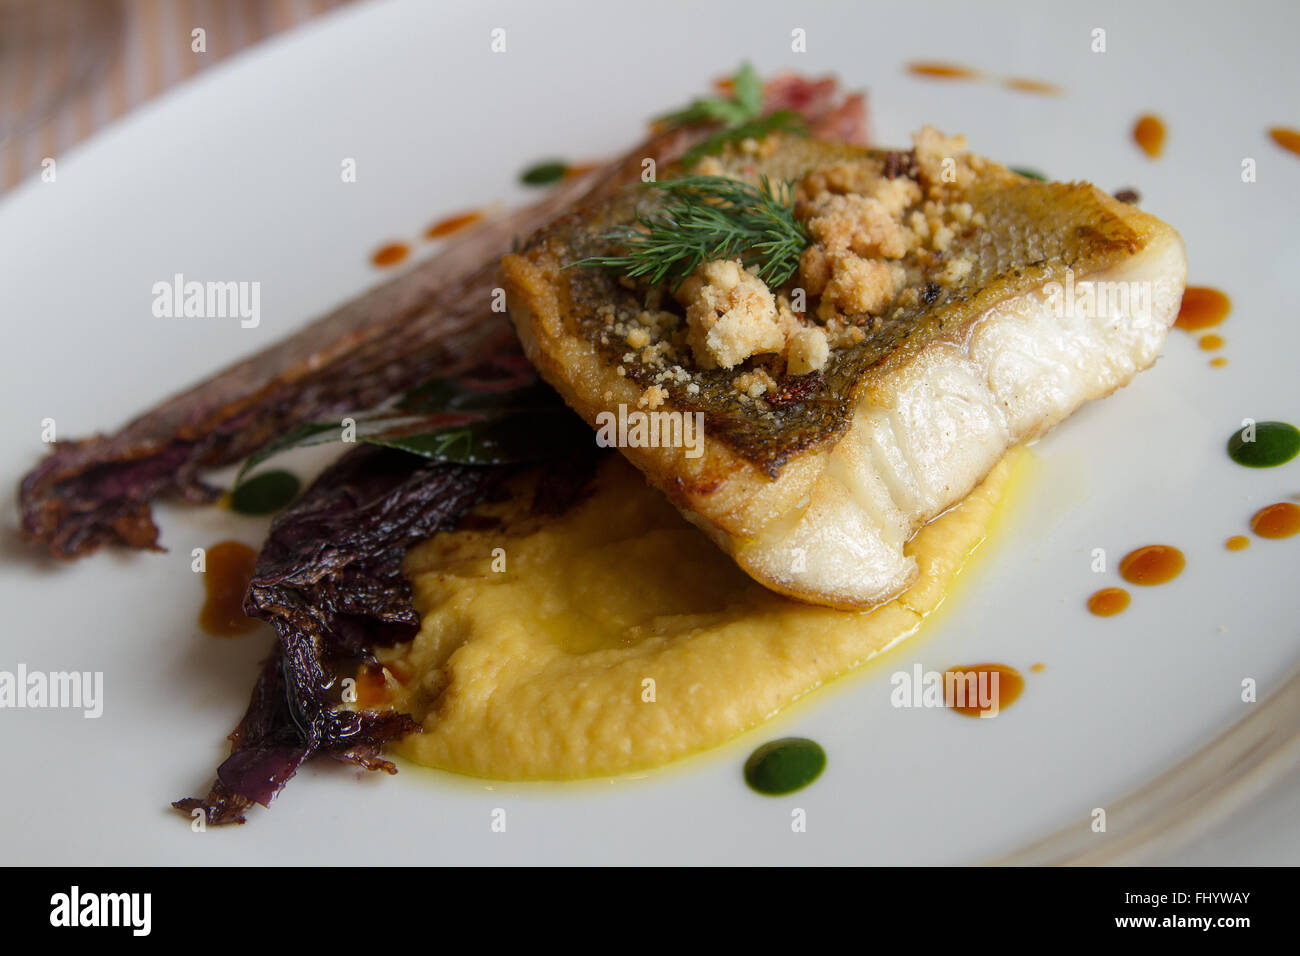 Grilled fish with vegetables Stock Photo